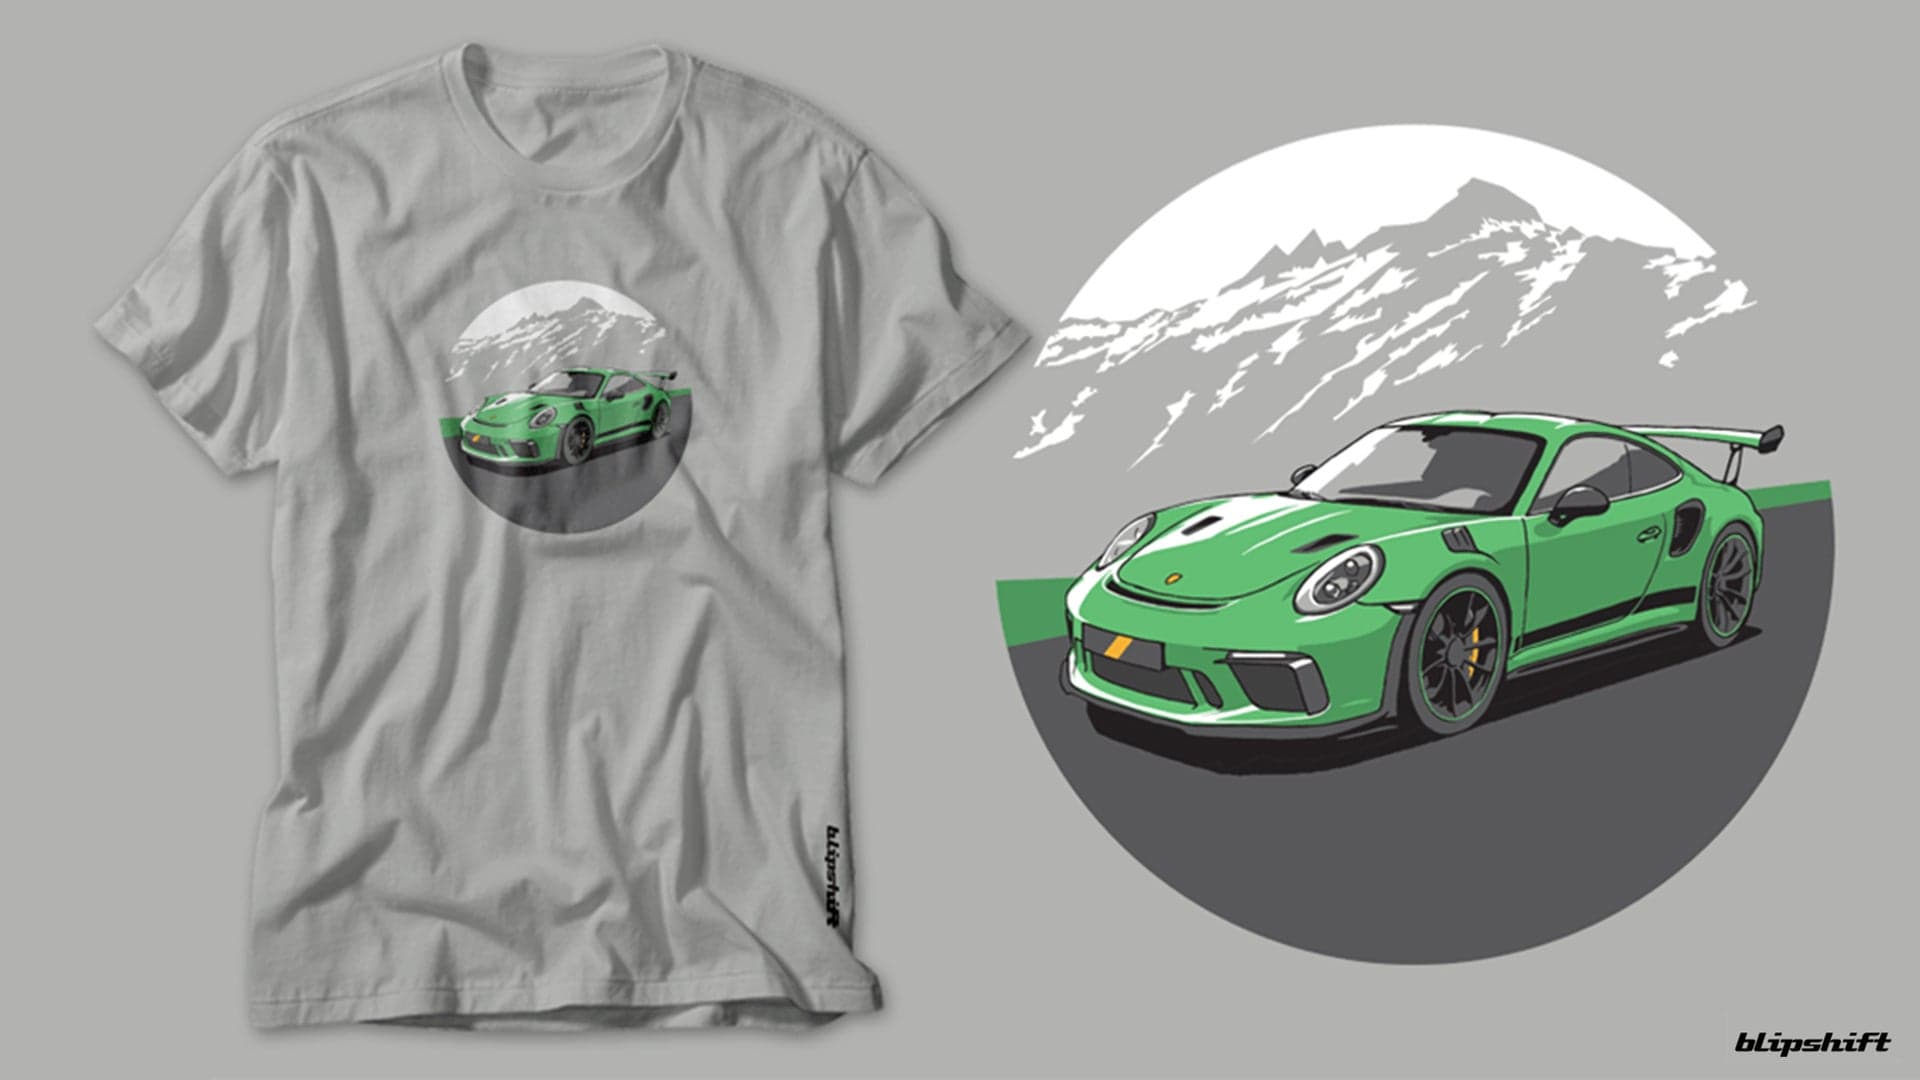 The Drive and Blipshift Team Up for the Porsche 911 GT3 RS T-Shirt of Your Dreams